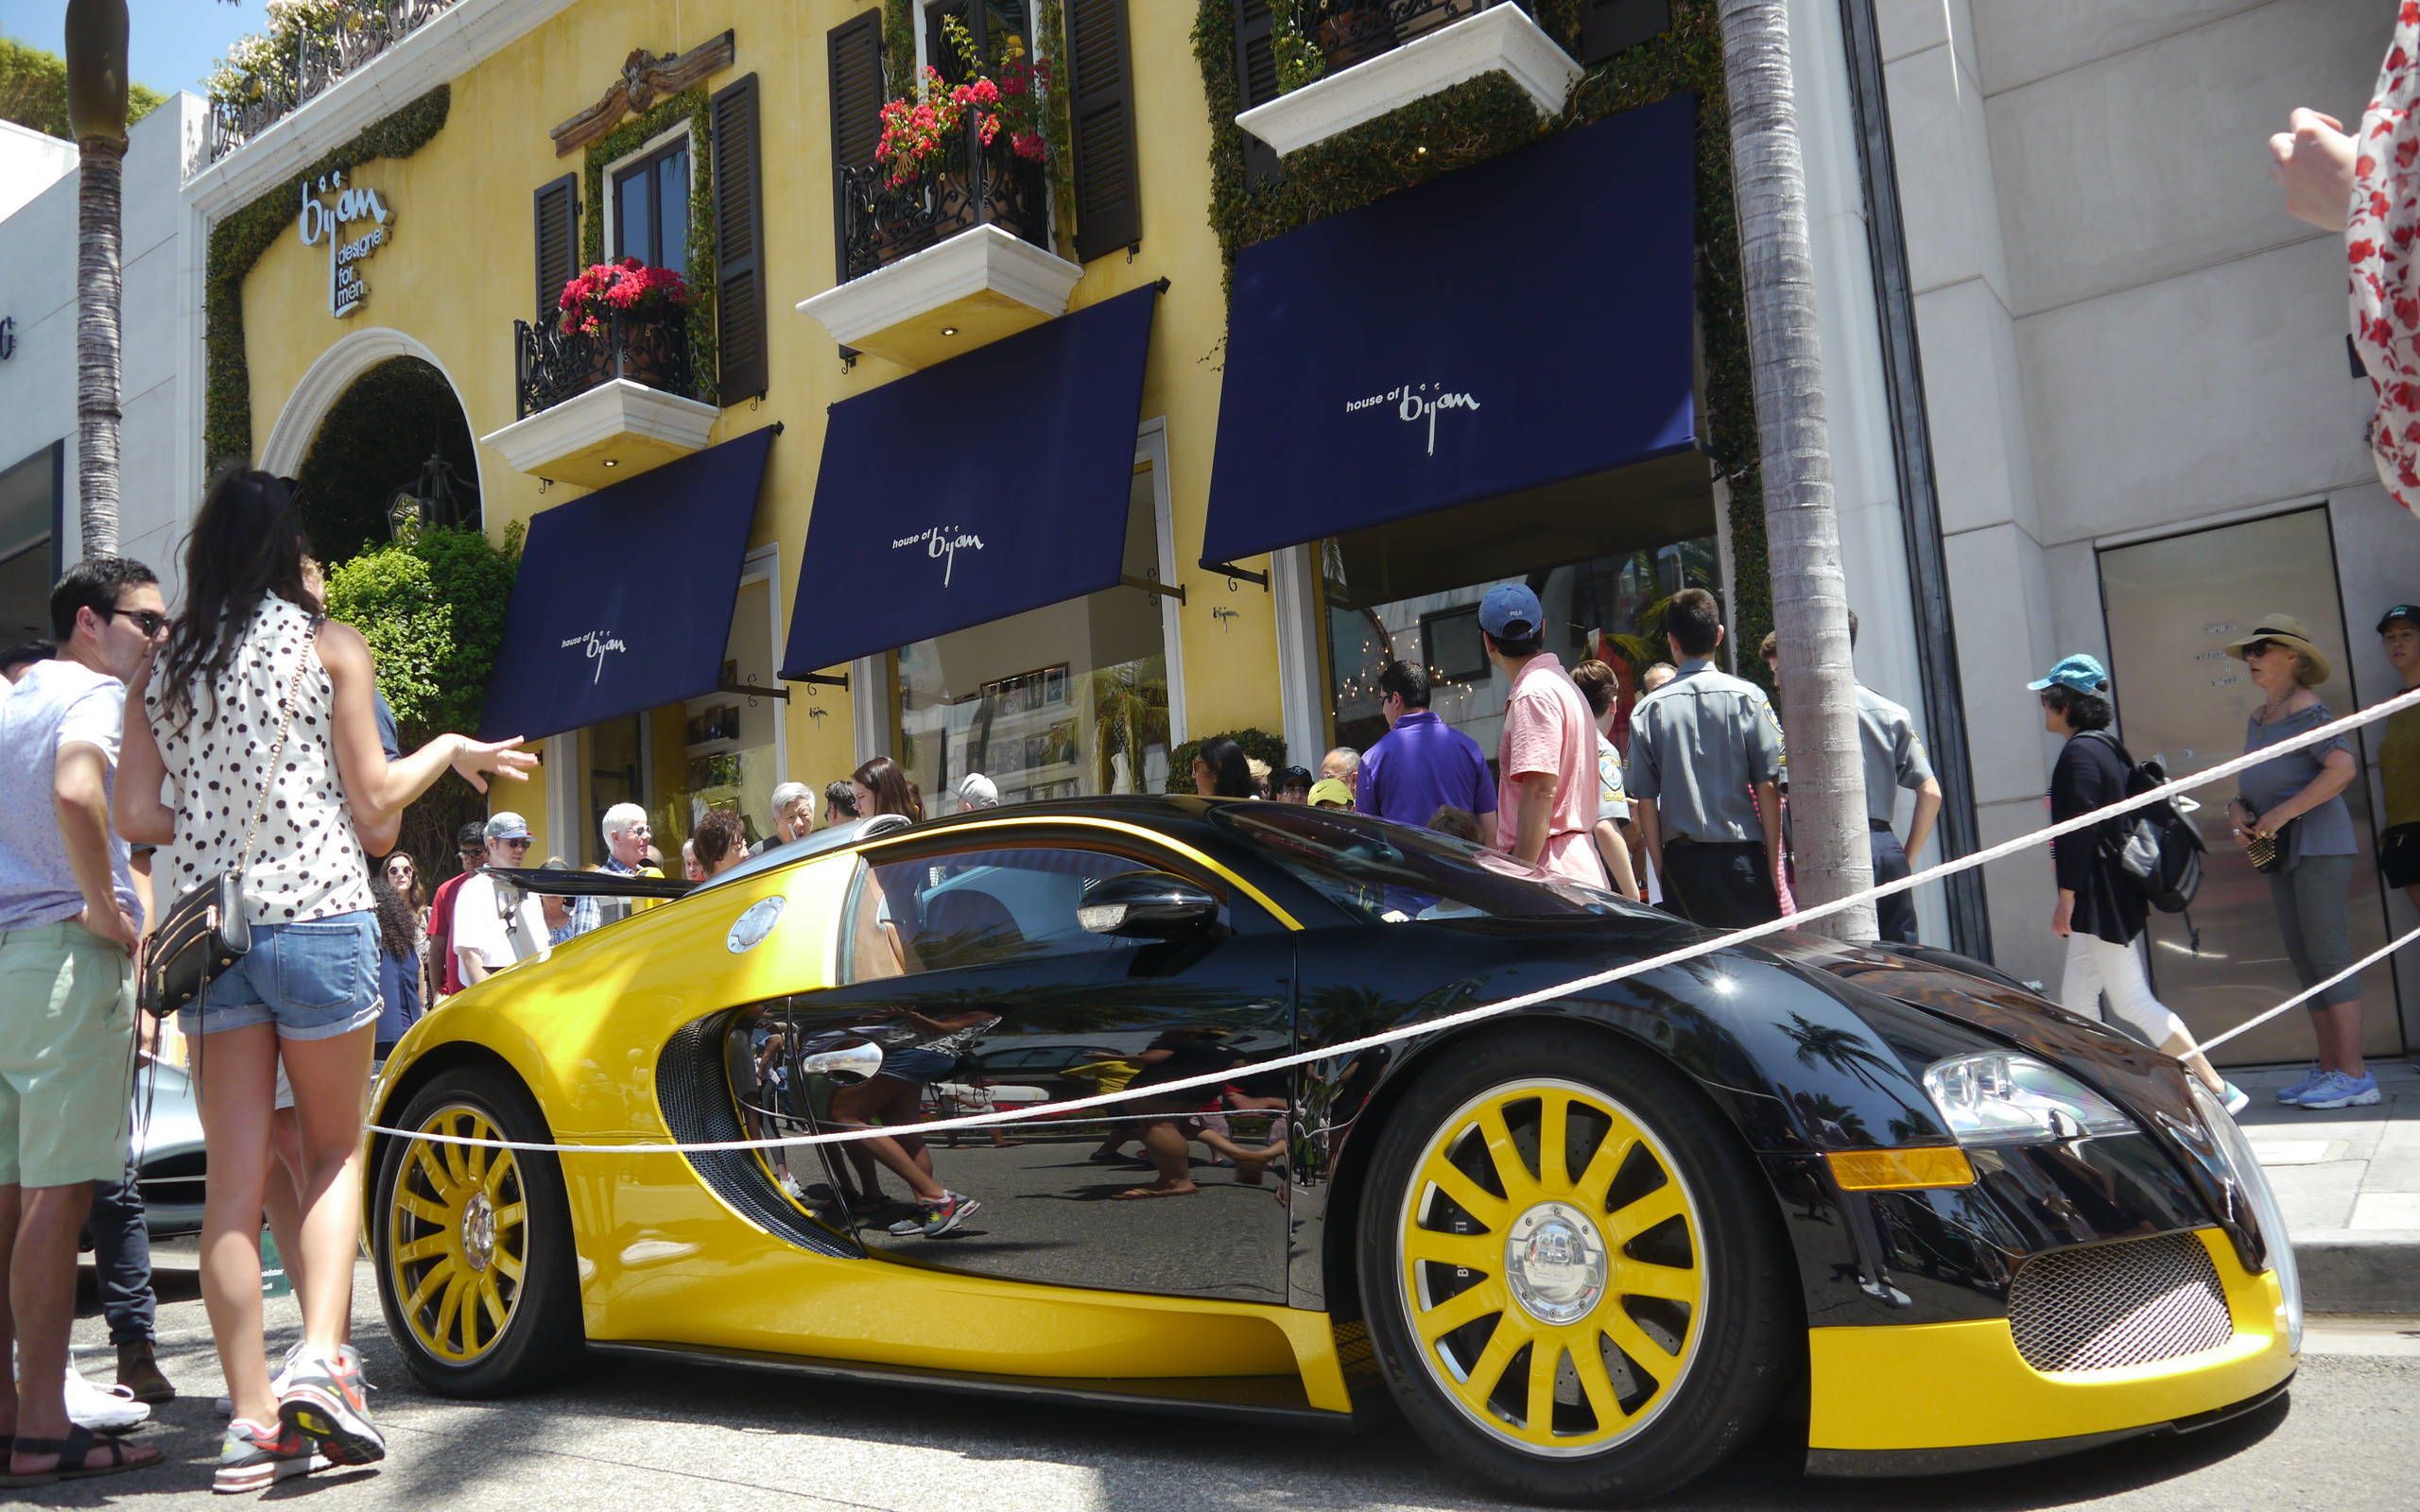 Luxury cars, Rodeo Drive, Beverly Hills, Los Angeles, California